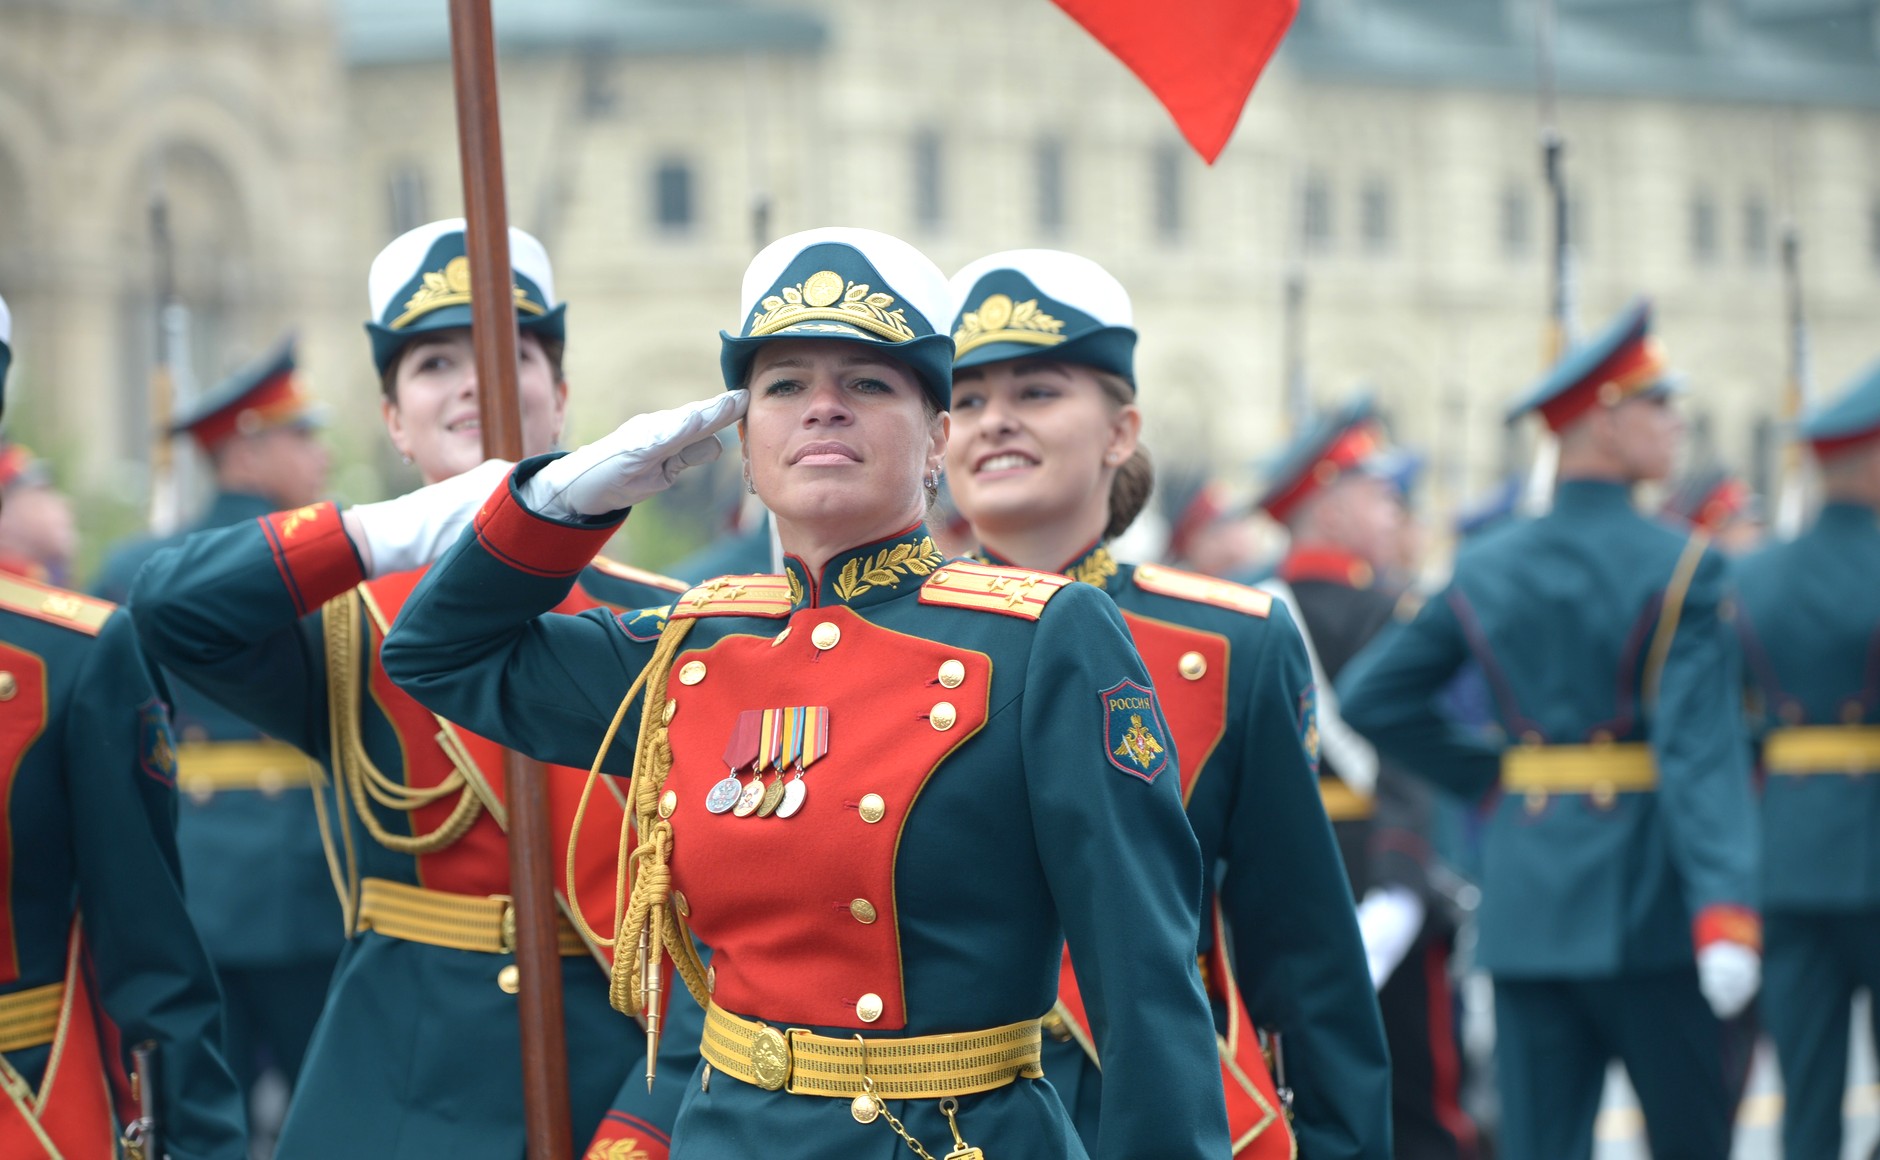 Top 10 Most Beautiful Female Soldiers : Top 10 Countries With Most Beautiful Women Soldiers In World Mashtos : Norway army is consist of ten per cent female soldiers.